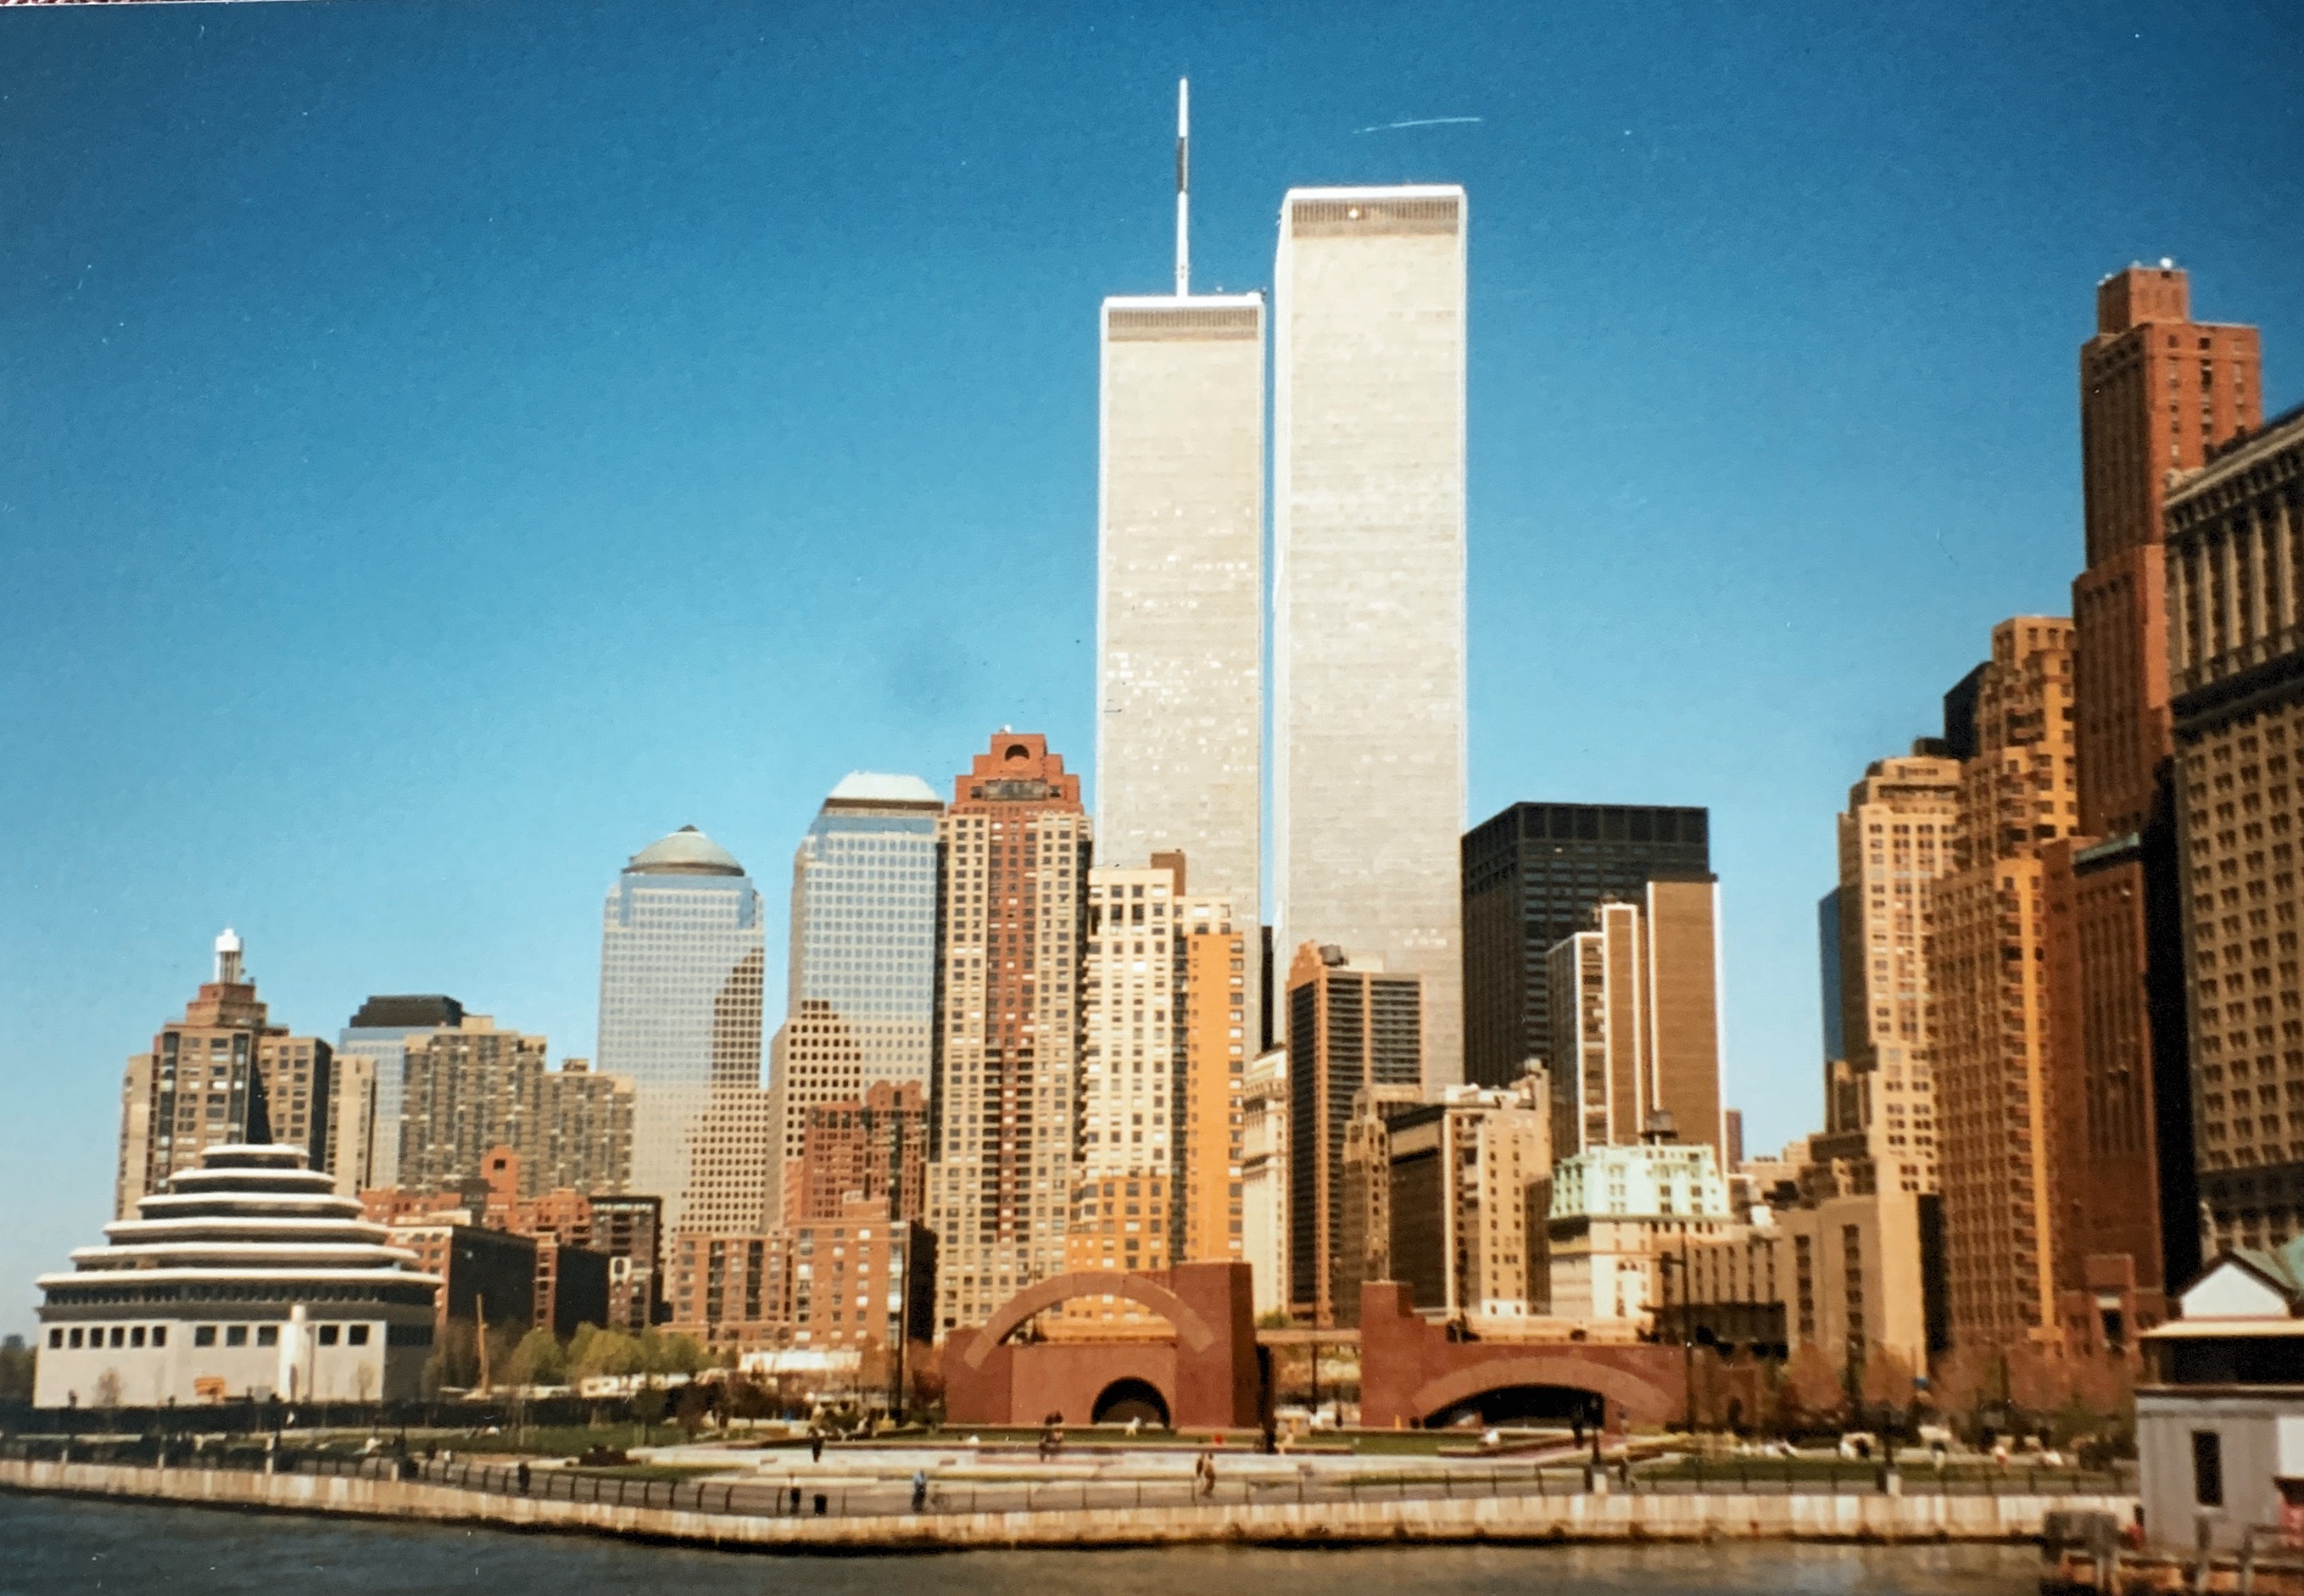 World Trade Center in the 1990’s. Photo taken by Kendra Good.